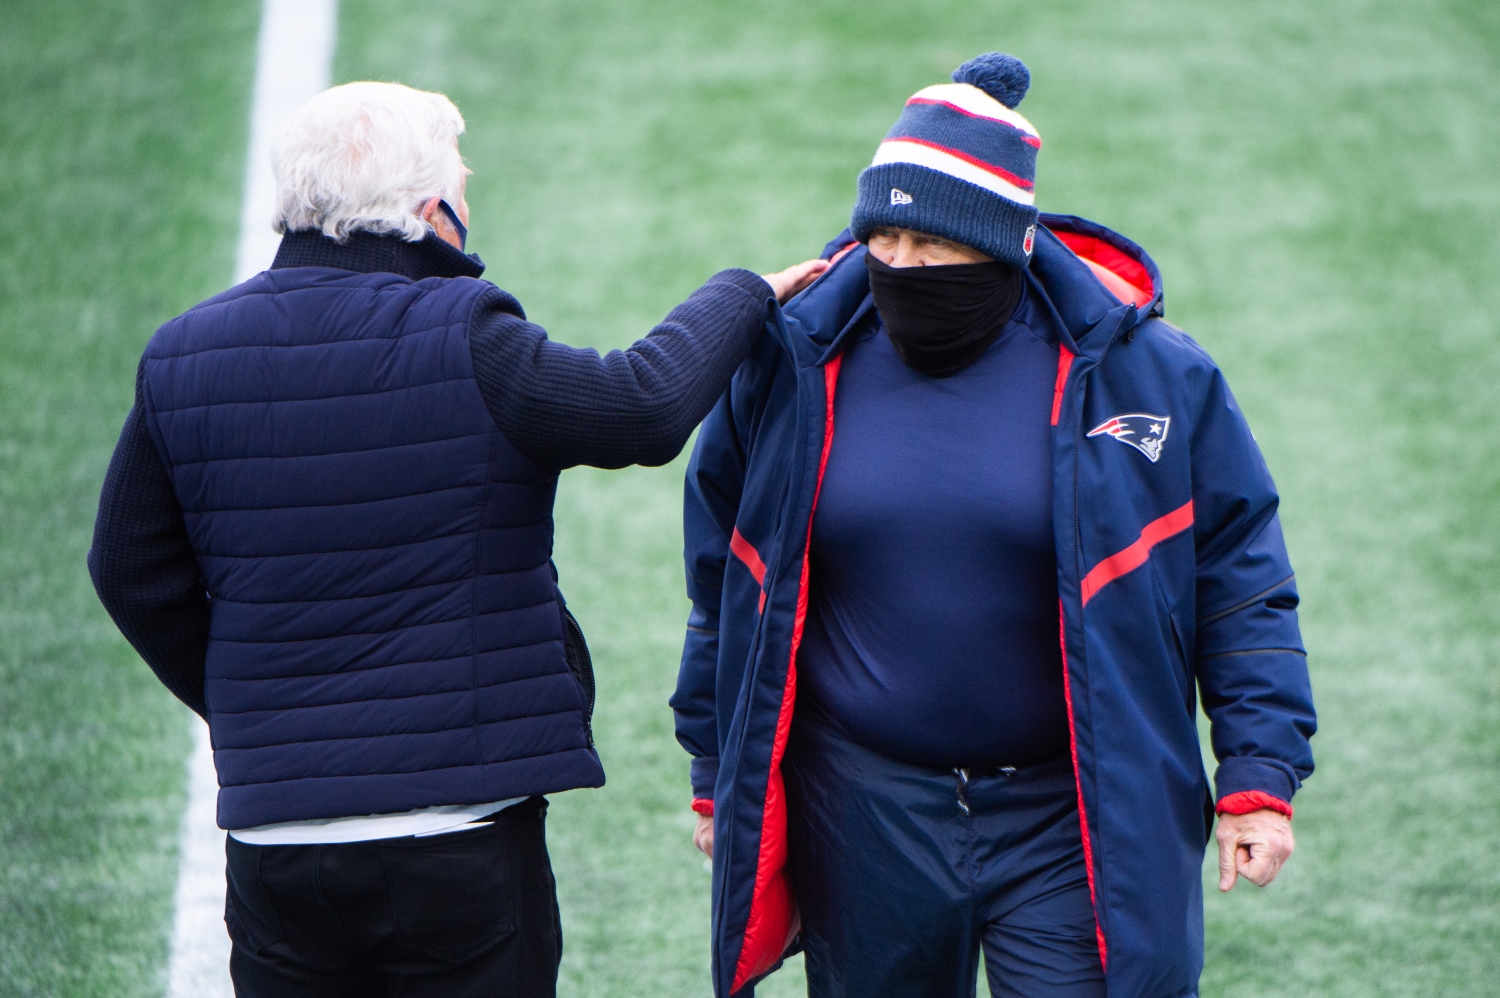 New England Patriots owner Robert Kraft pats head coach Bill Belichick on the shoulder during warmups prior to the start of the game against the New York Jets at Gillette Stadium in January 2021.